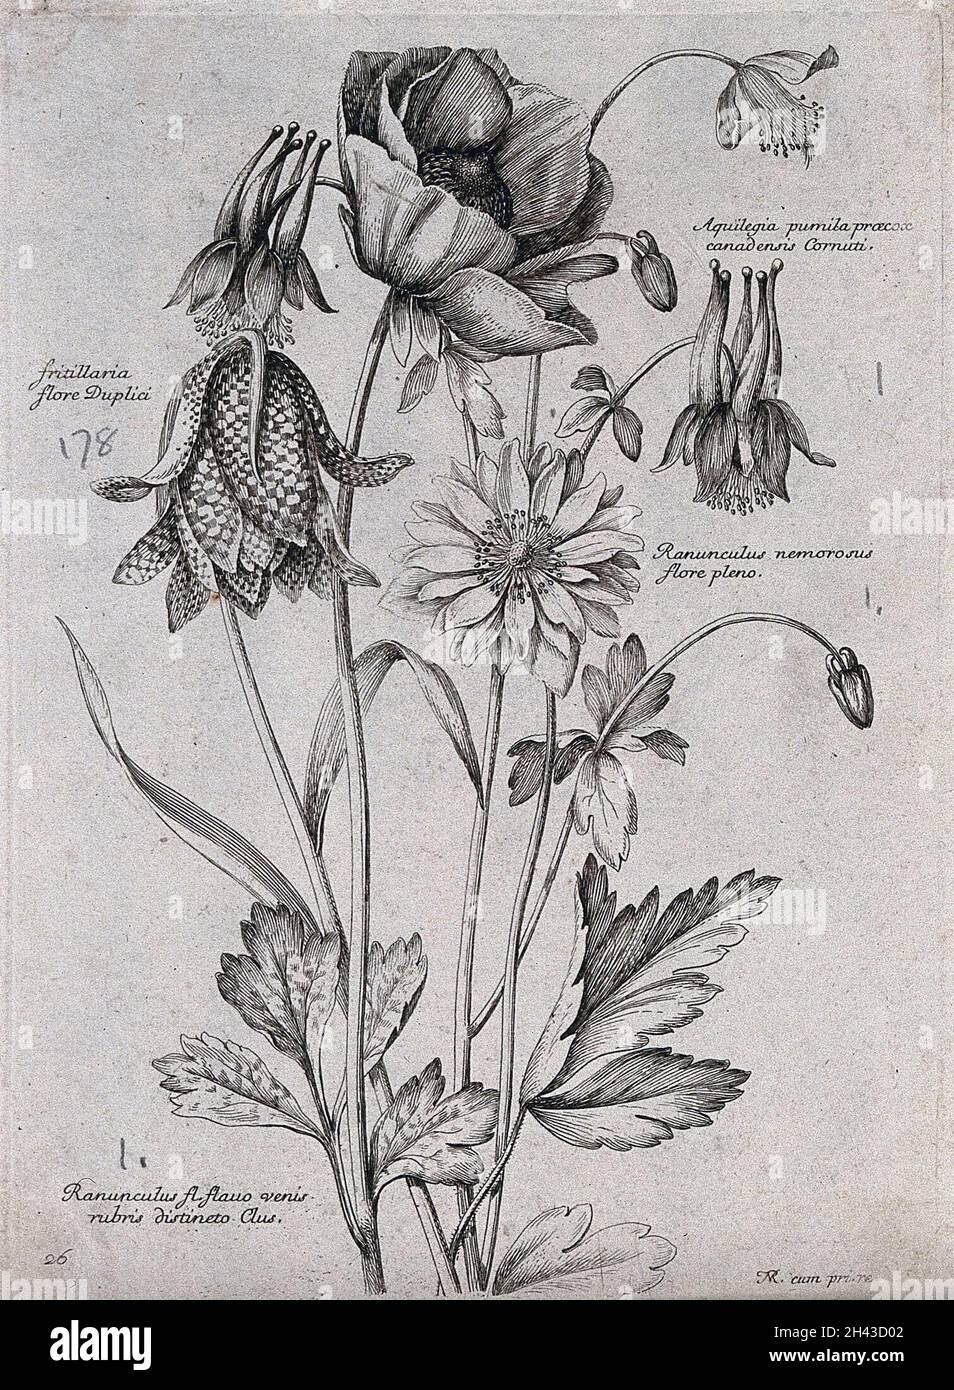 Four plants, including a fritillary (Fritillaria) and a wood buttercup (Ranunculus nemorosus): flowering stems. Etching by N. Robert, c. 1660, after himself. Stock Photo